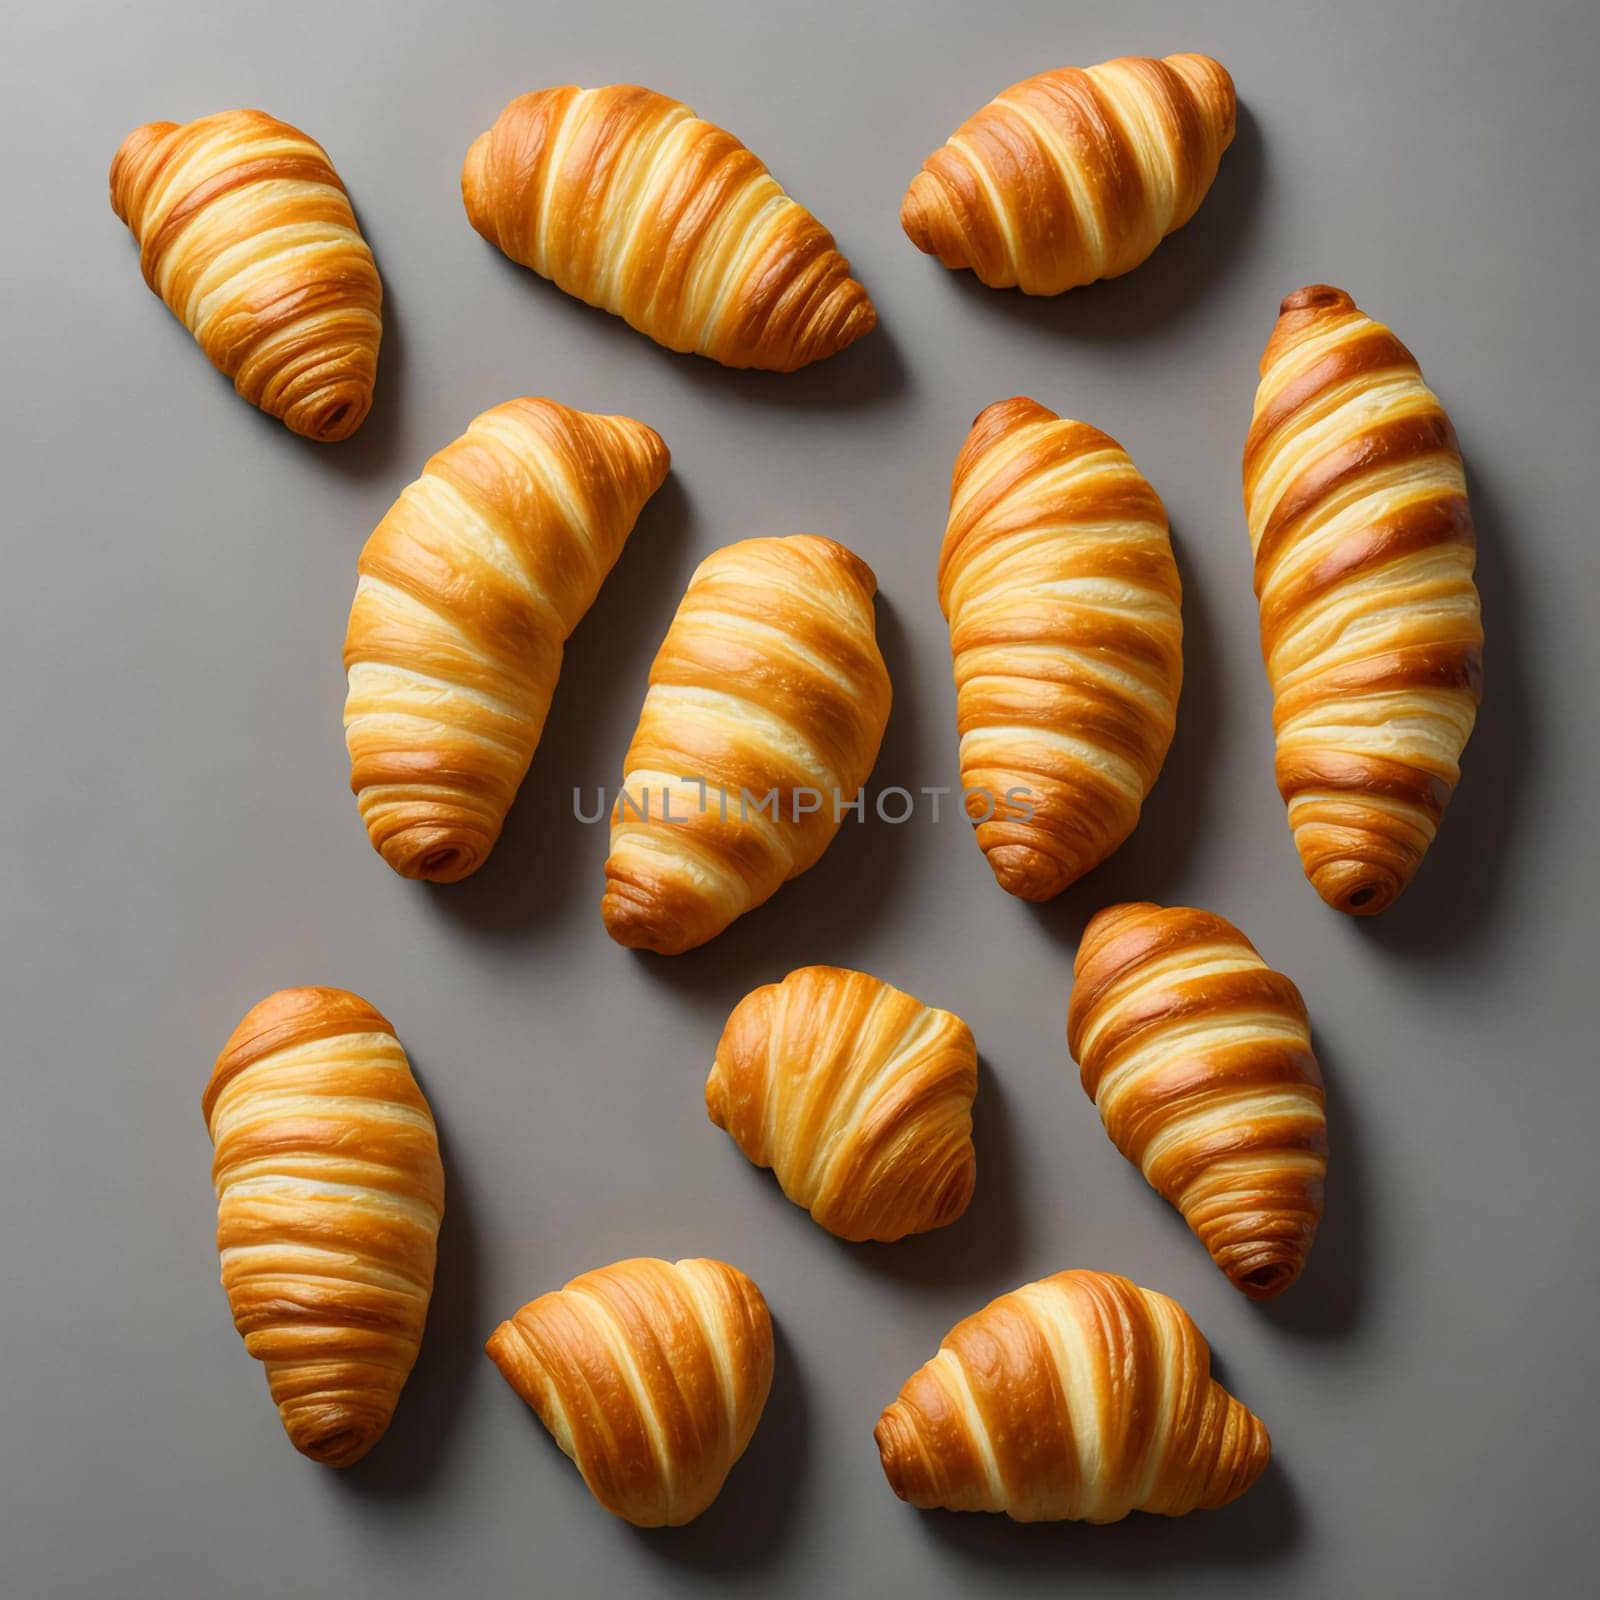 Croissants freshly baked on a light gray background by Севостьянов